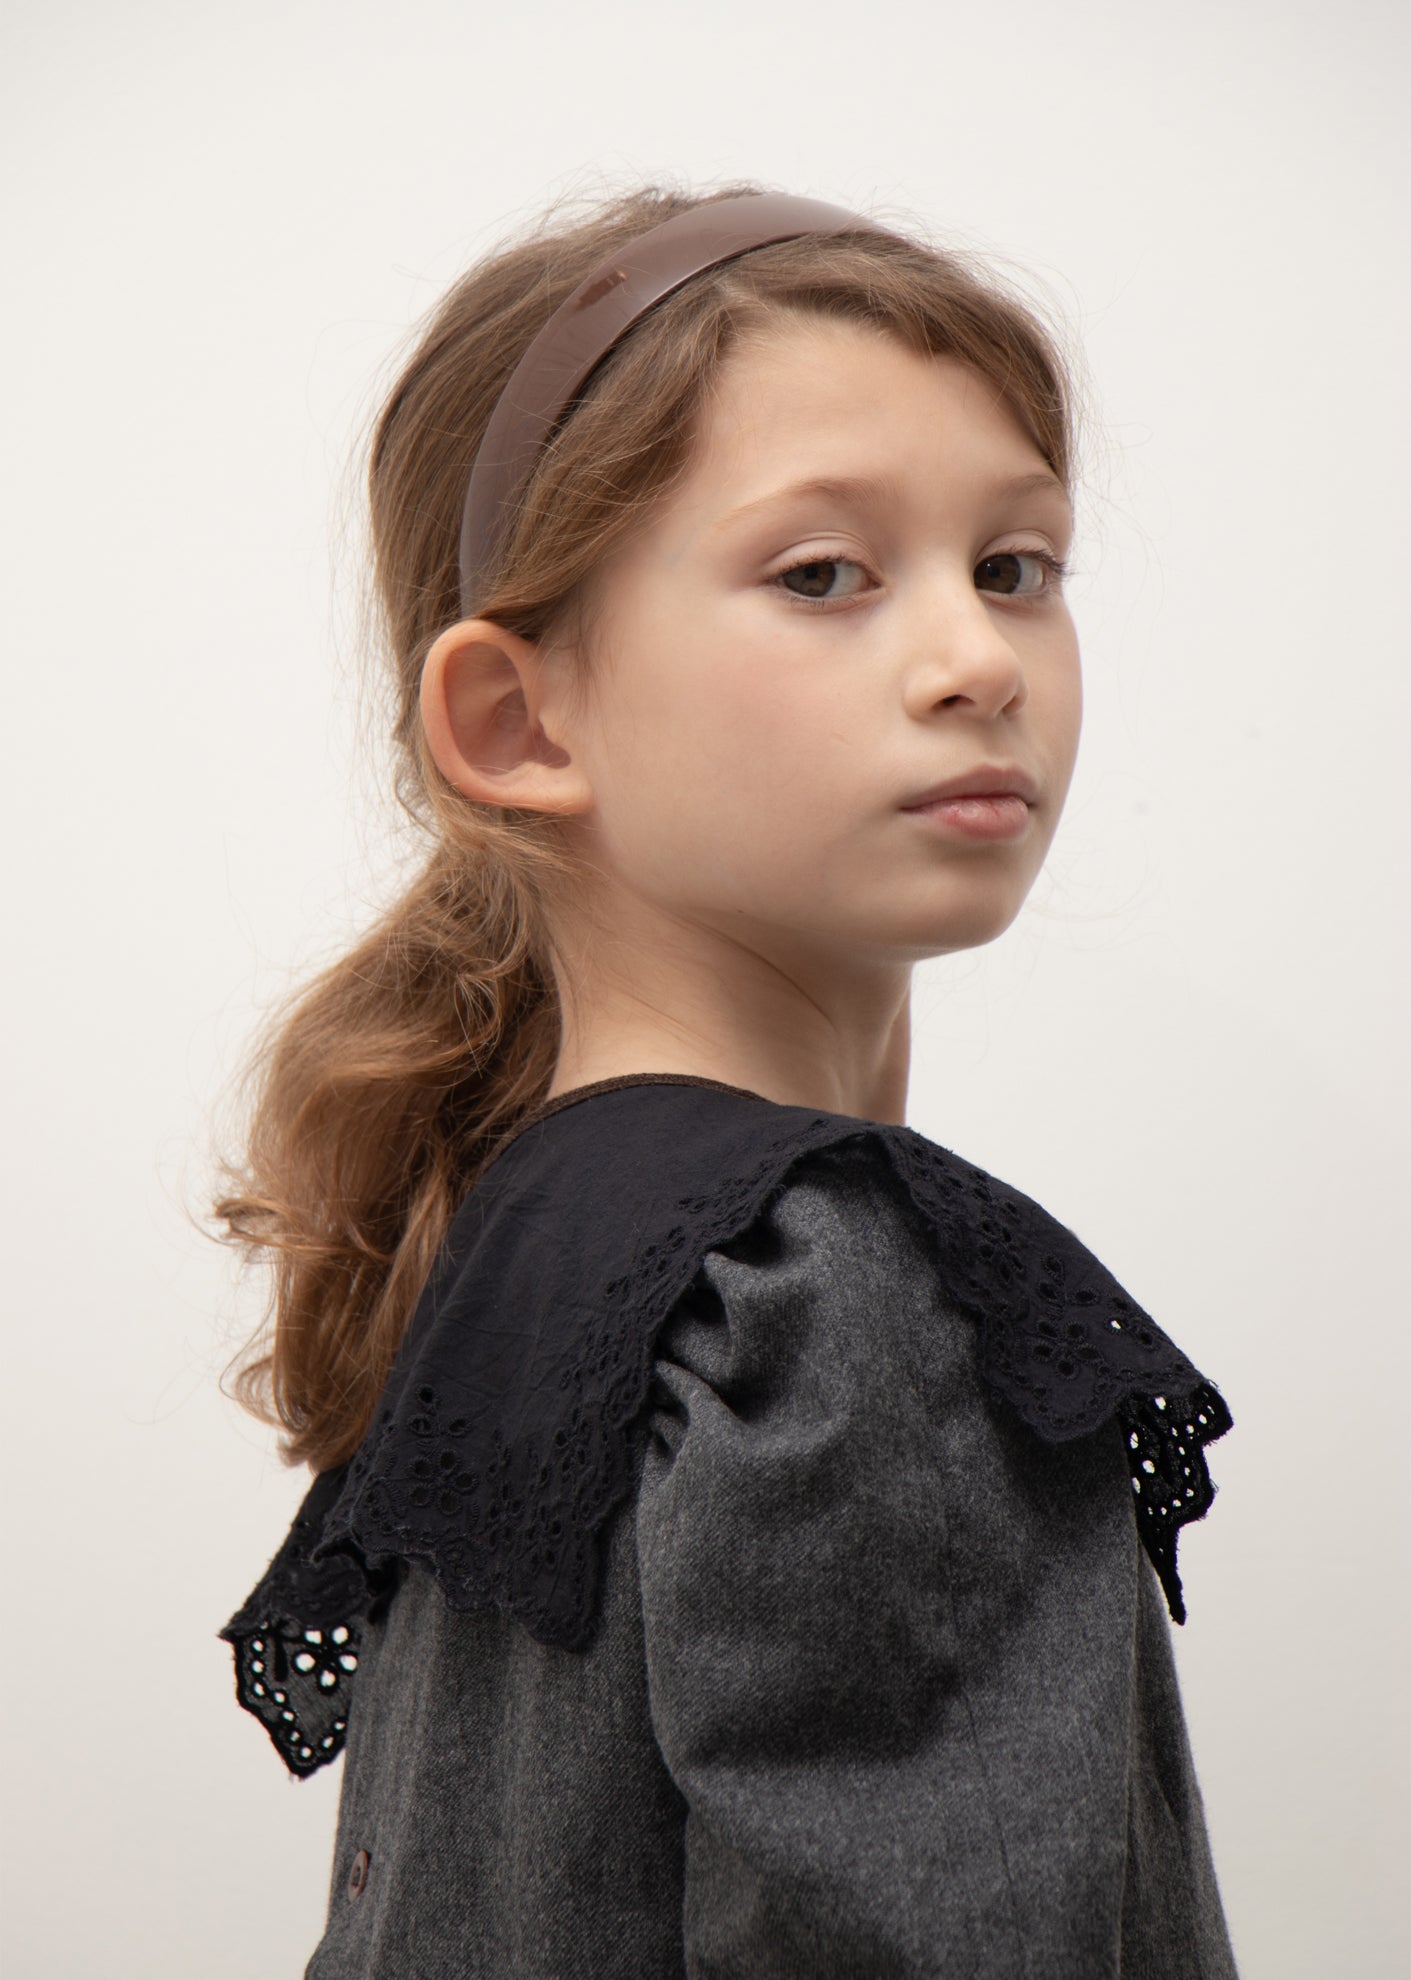 EMBROIDERED KIDS COLLAR - BLACK BRODERIE ANGLAISE 3